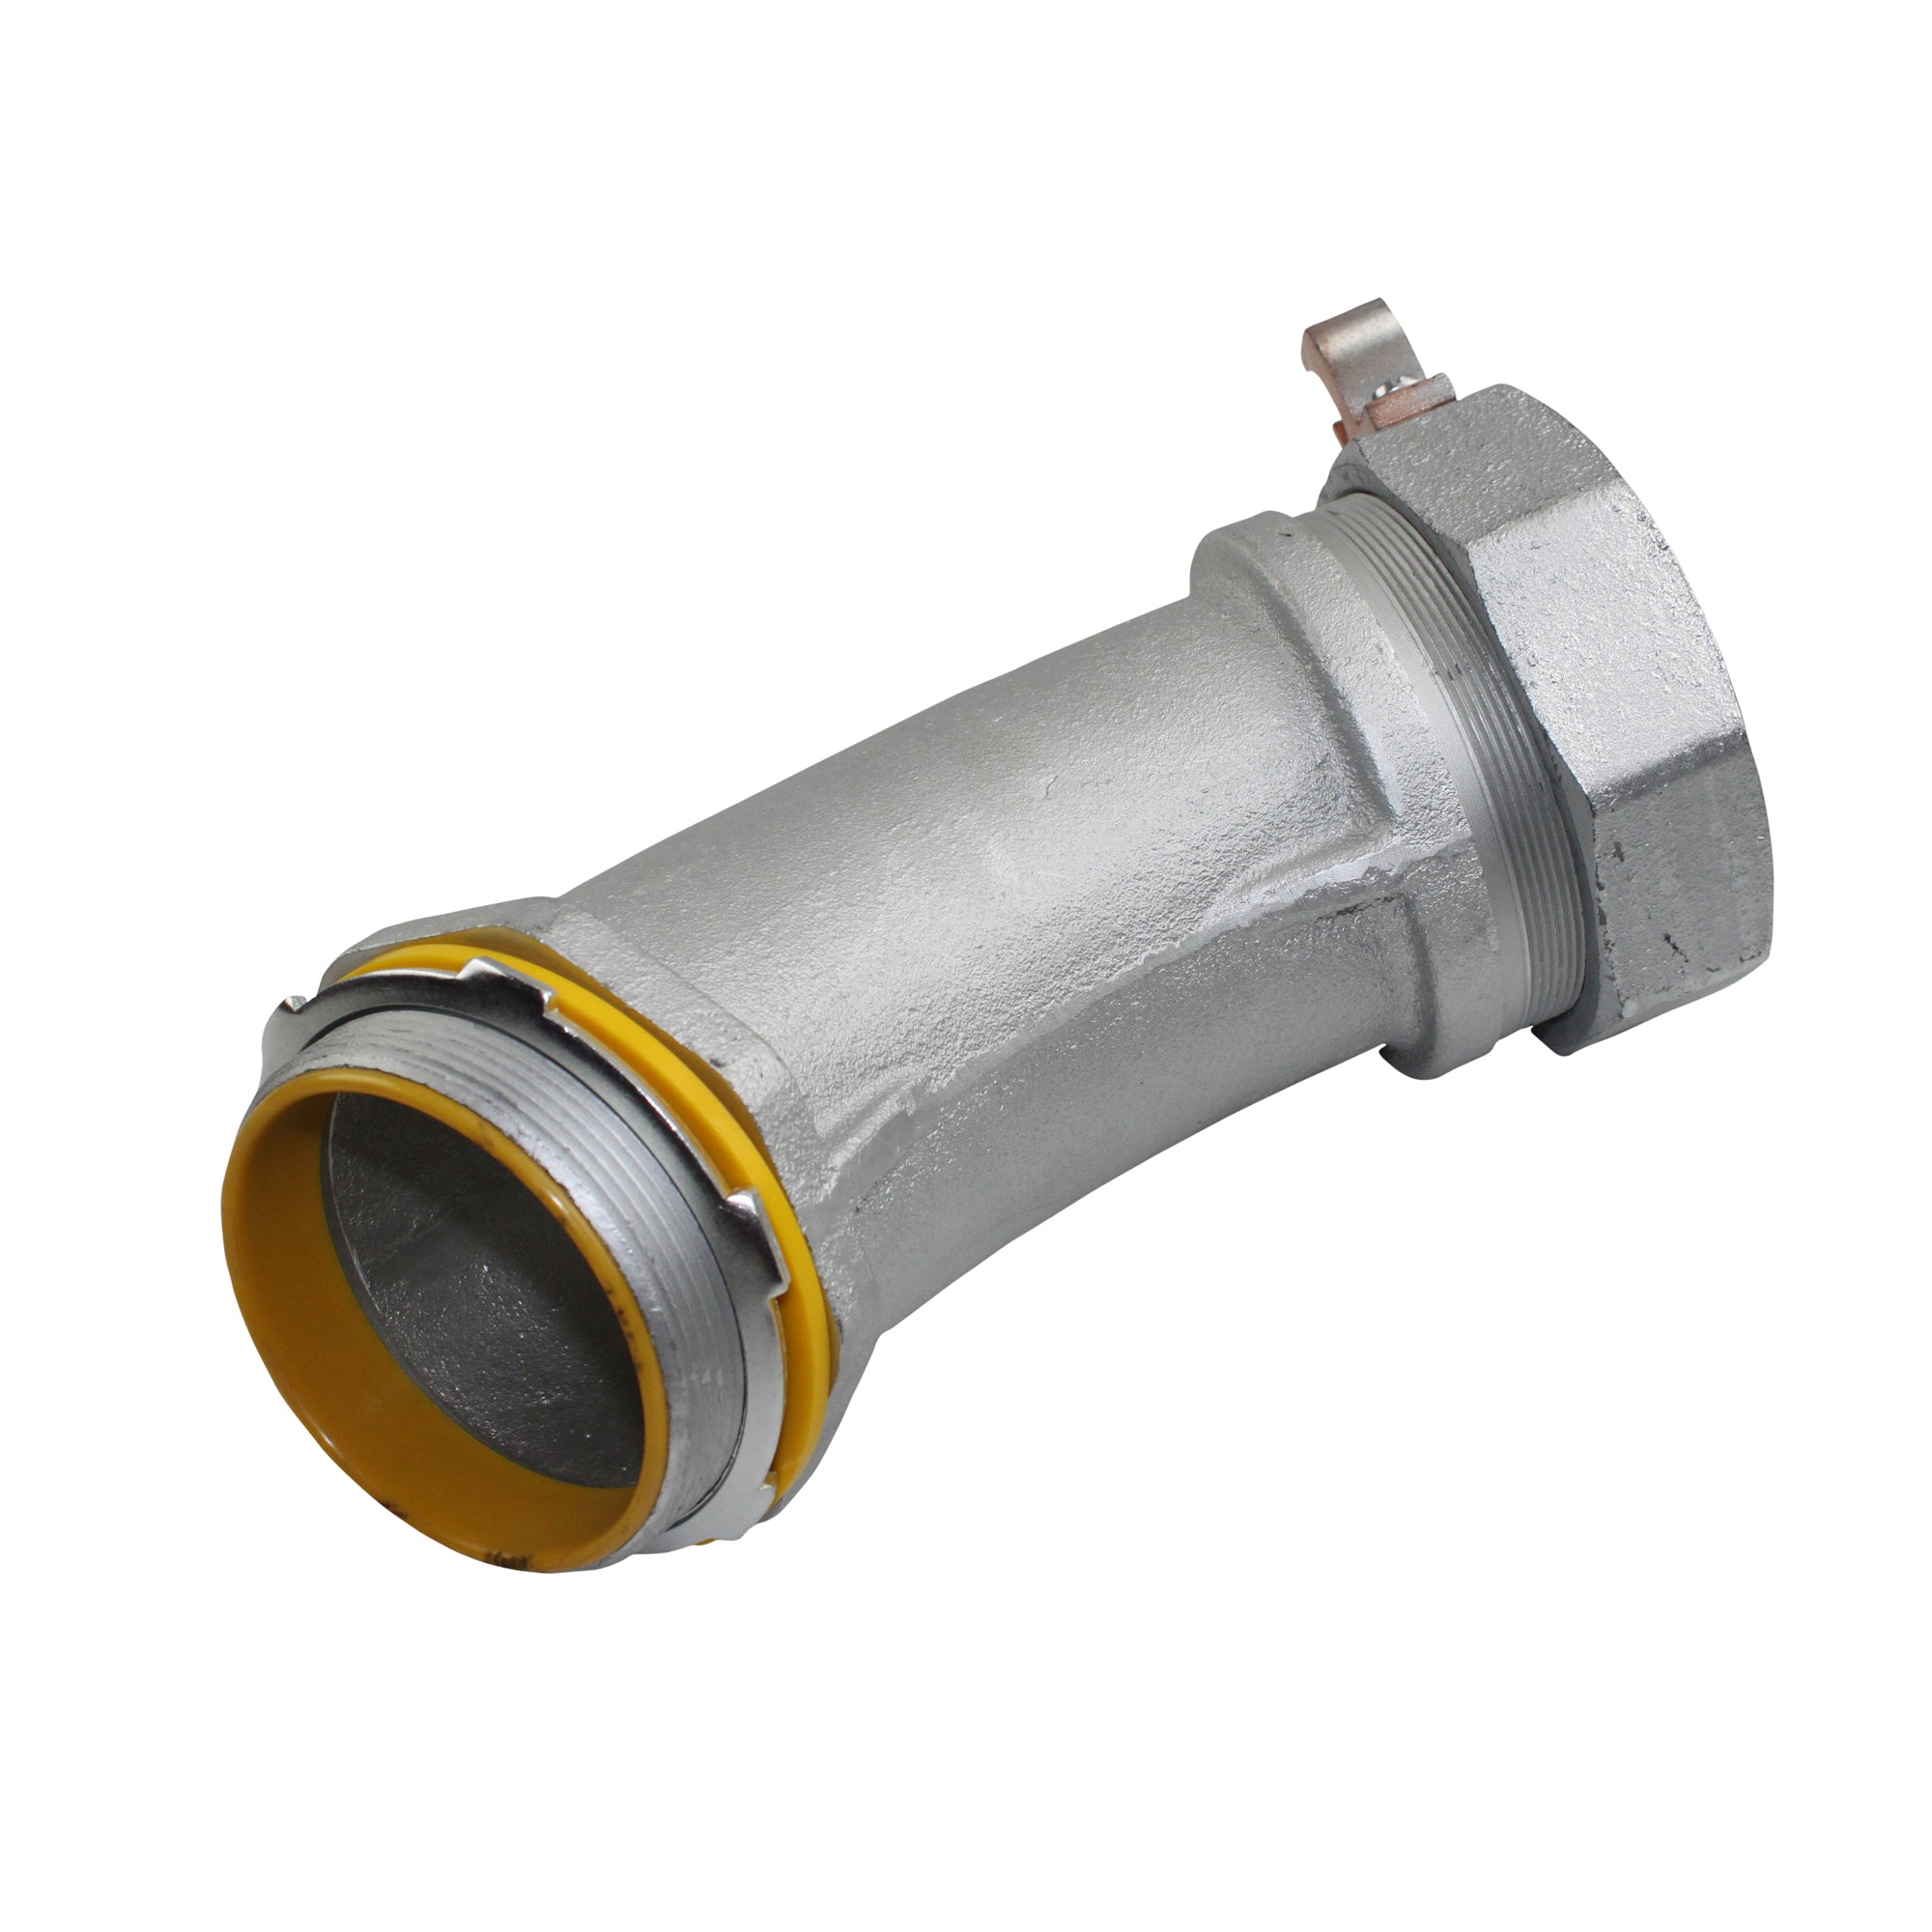 Crouse Hinds, CROUSE HINDS LTB40045GC 4" LIQUIDTIGHT 45 DEGREE CONNECTOR 3/0 CU INS. THROAT